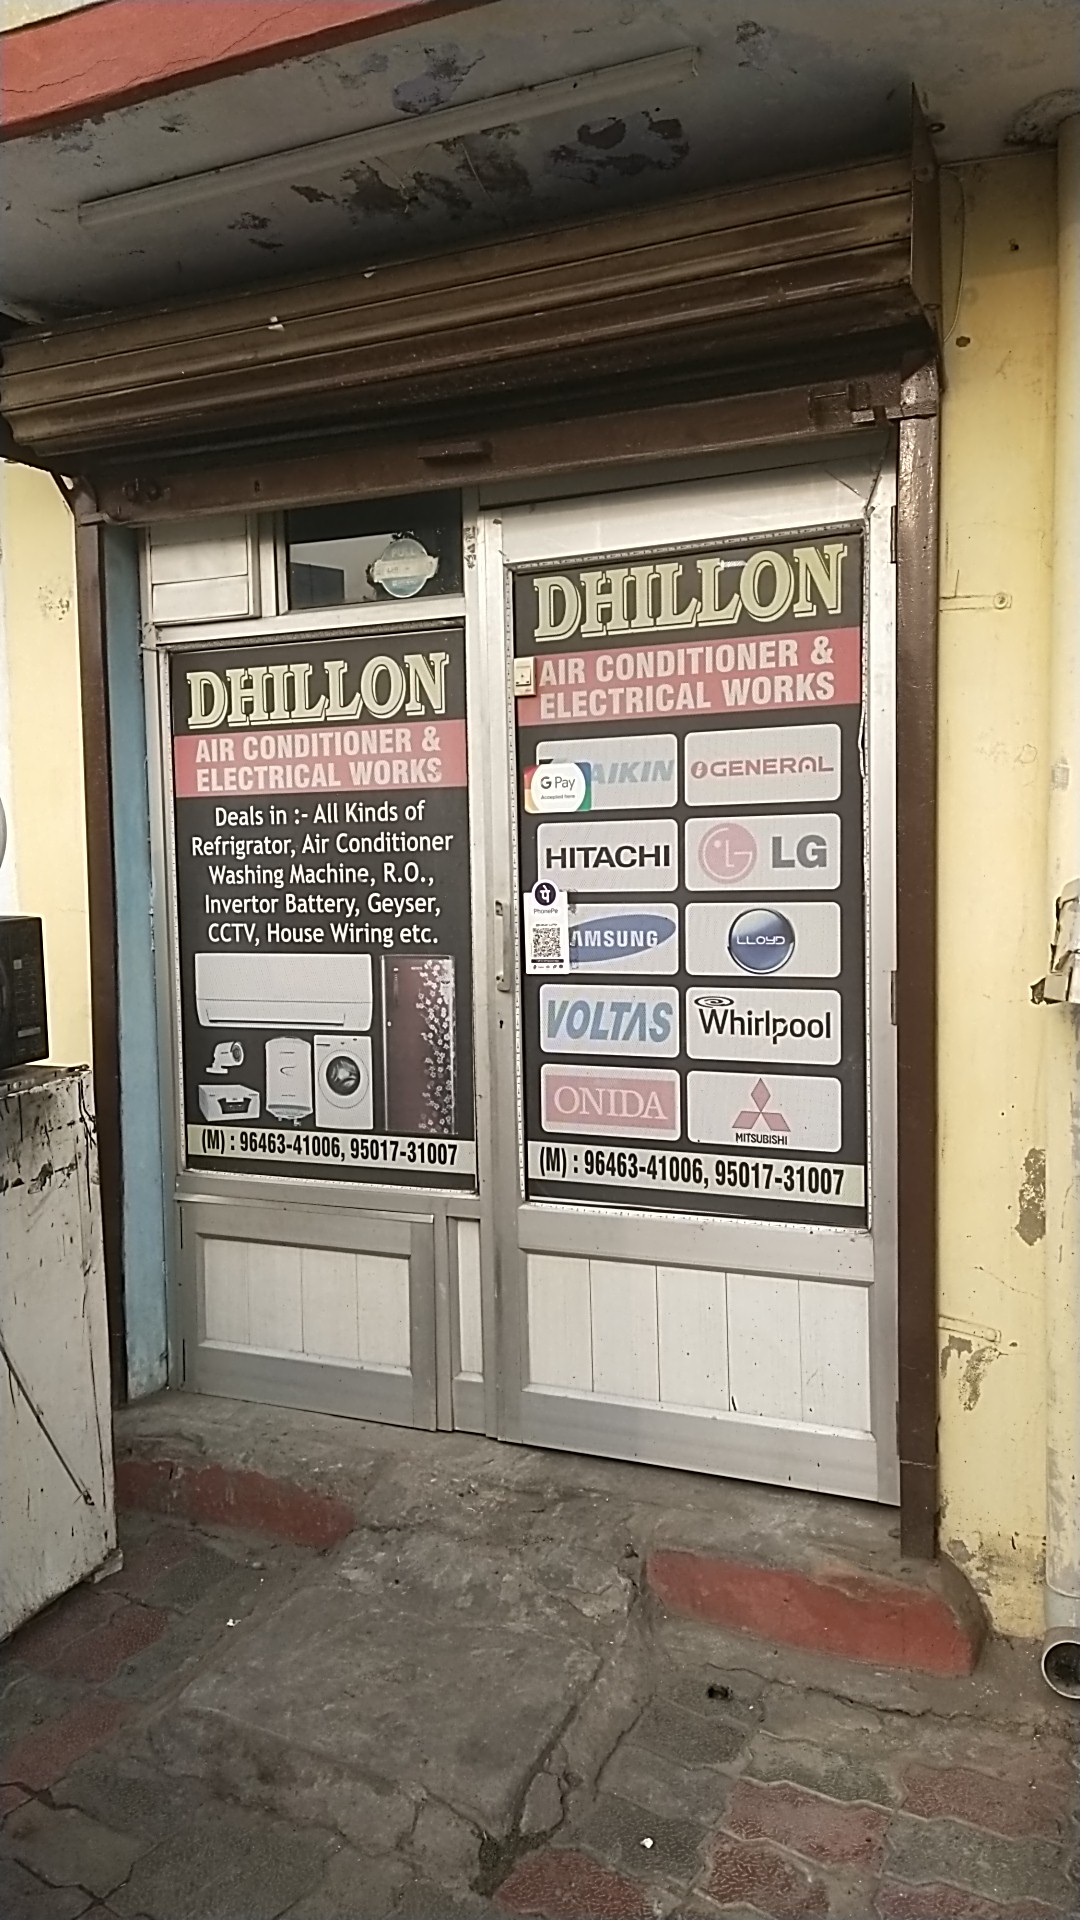 DHILLON Air Conditioner & Electrical Works